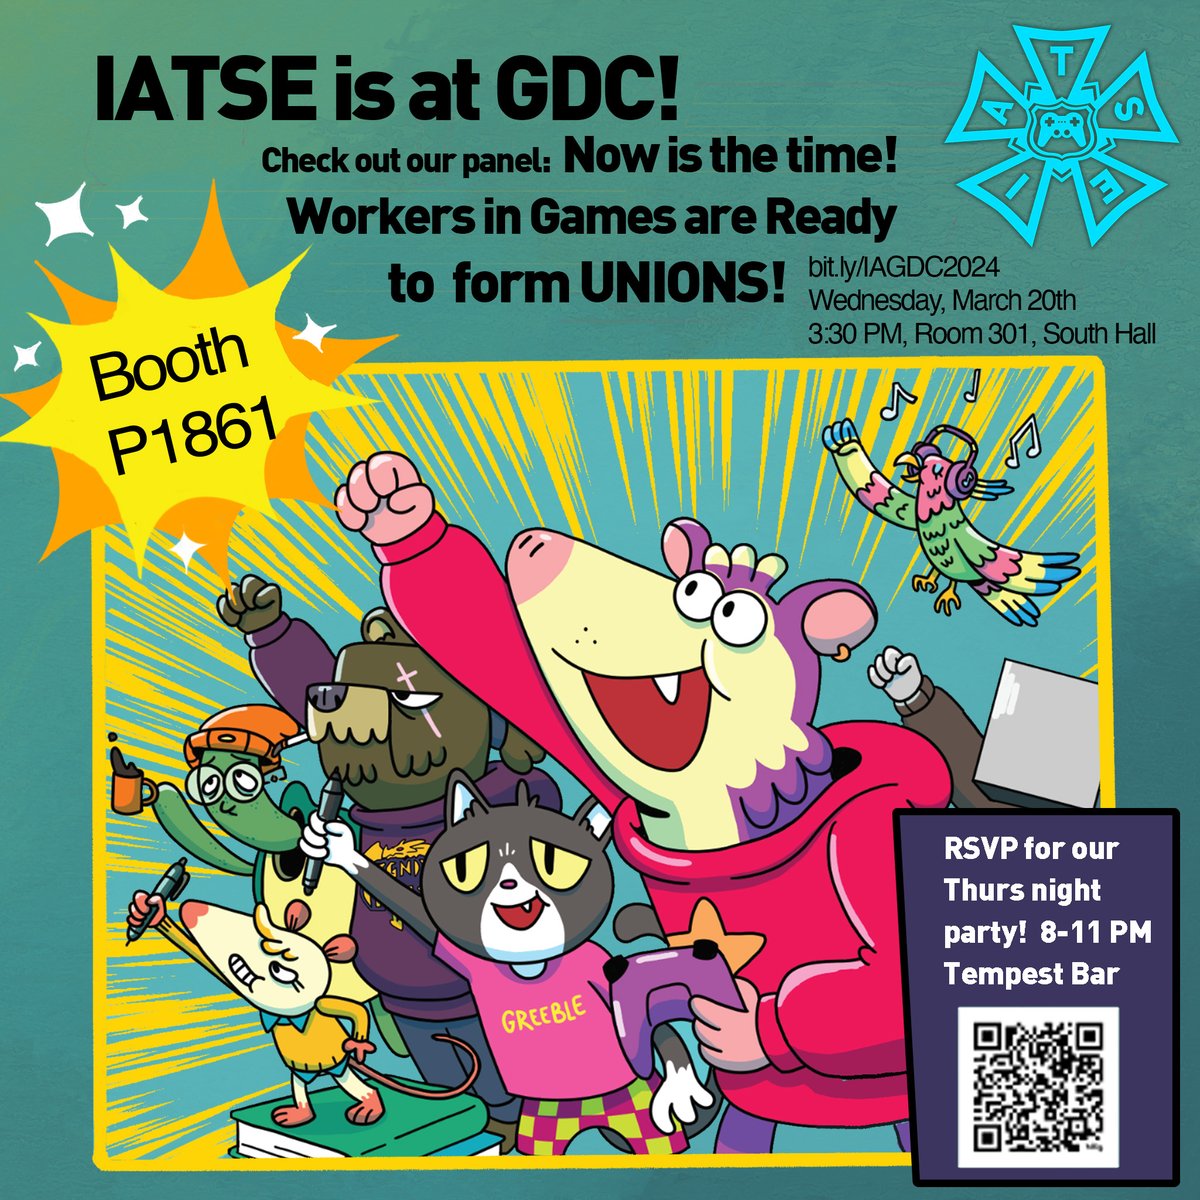 THEATRICAL STAGE EMPLOYEES UNION TO LEVEL UP PRESENCE AT 2024 GAME DEVELOPERS CONFERENCE IATSE, the largest entertainment union in the US, will host an official panel on 3/20 at #GDC2024, discussing why now is the moment for game workers to win overdue rights and protections.